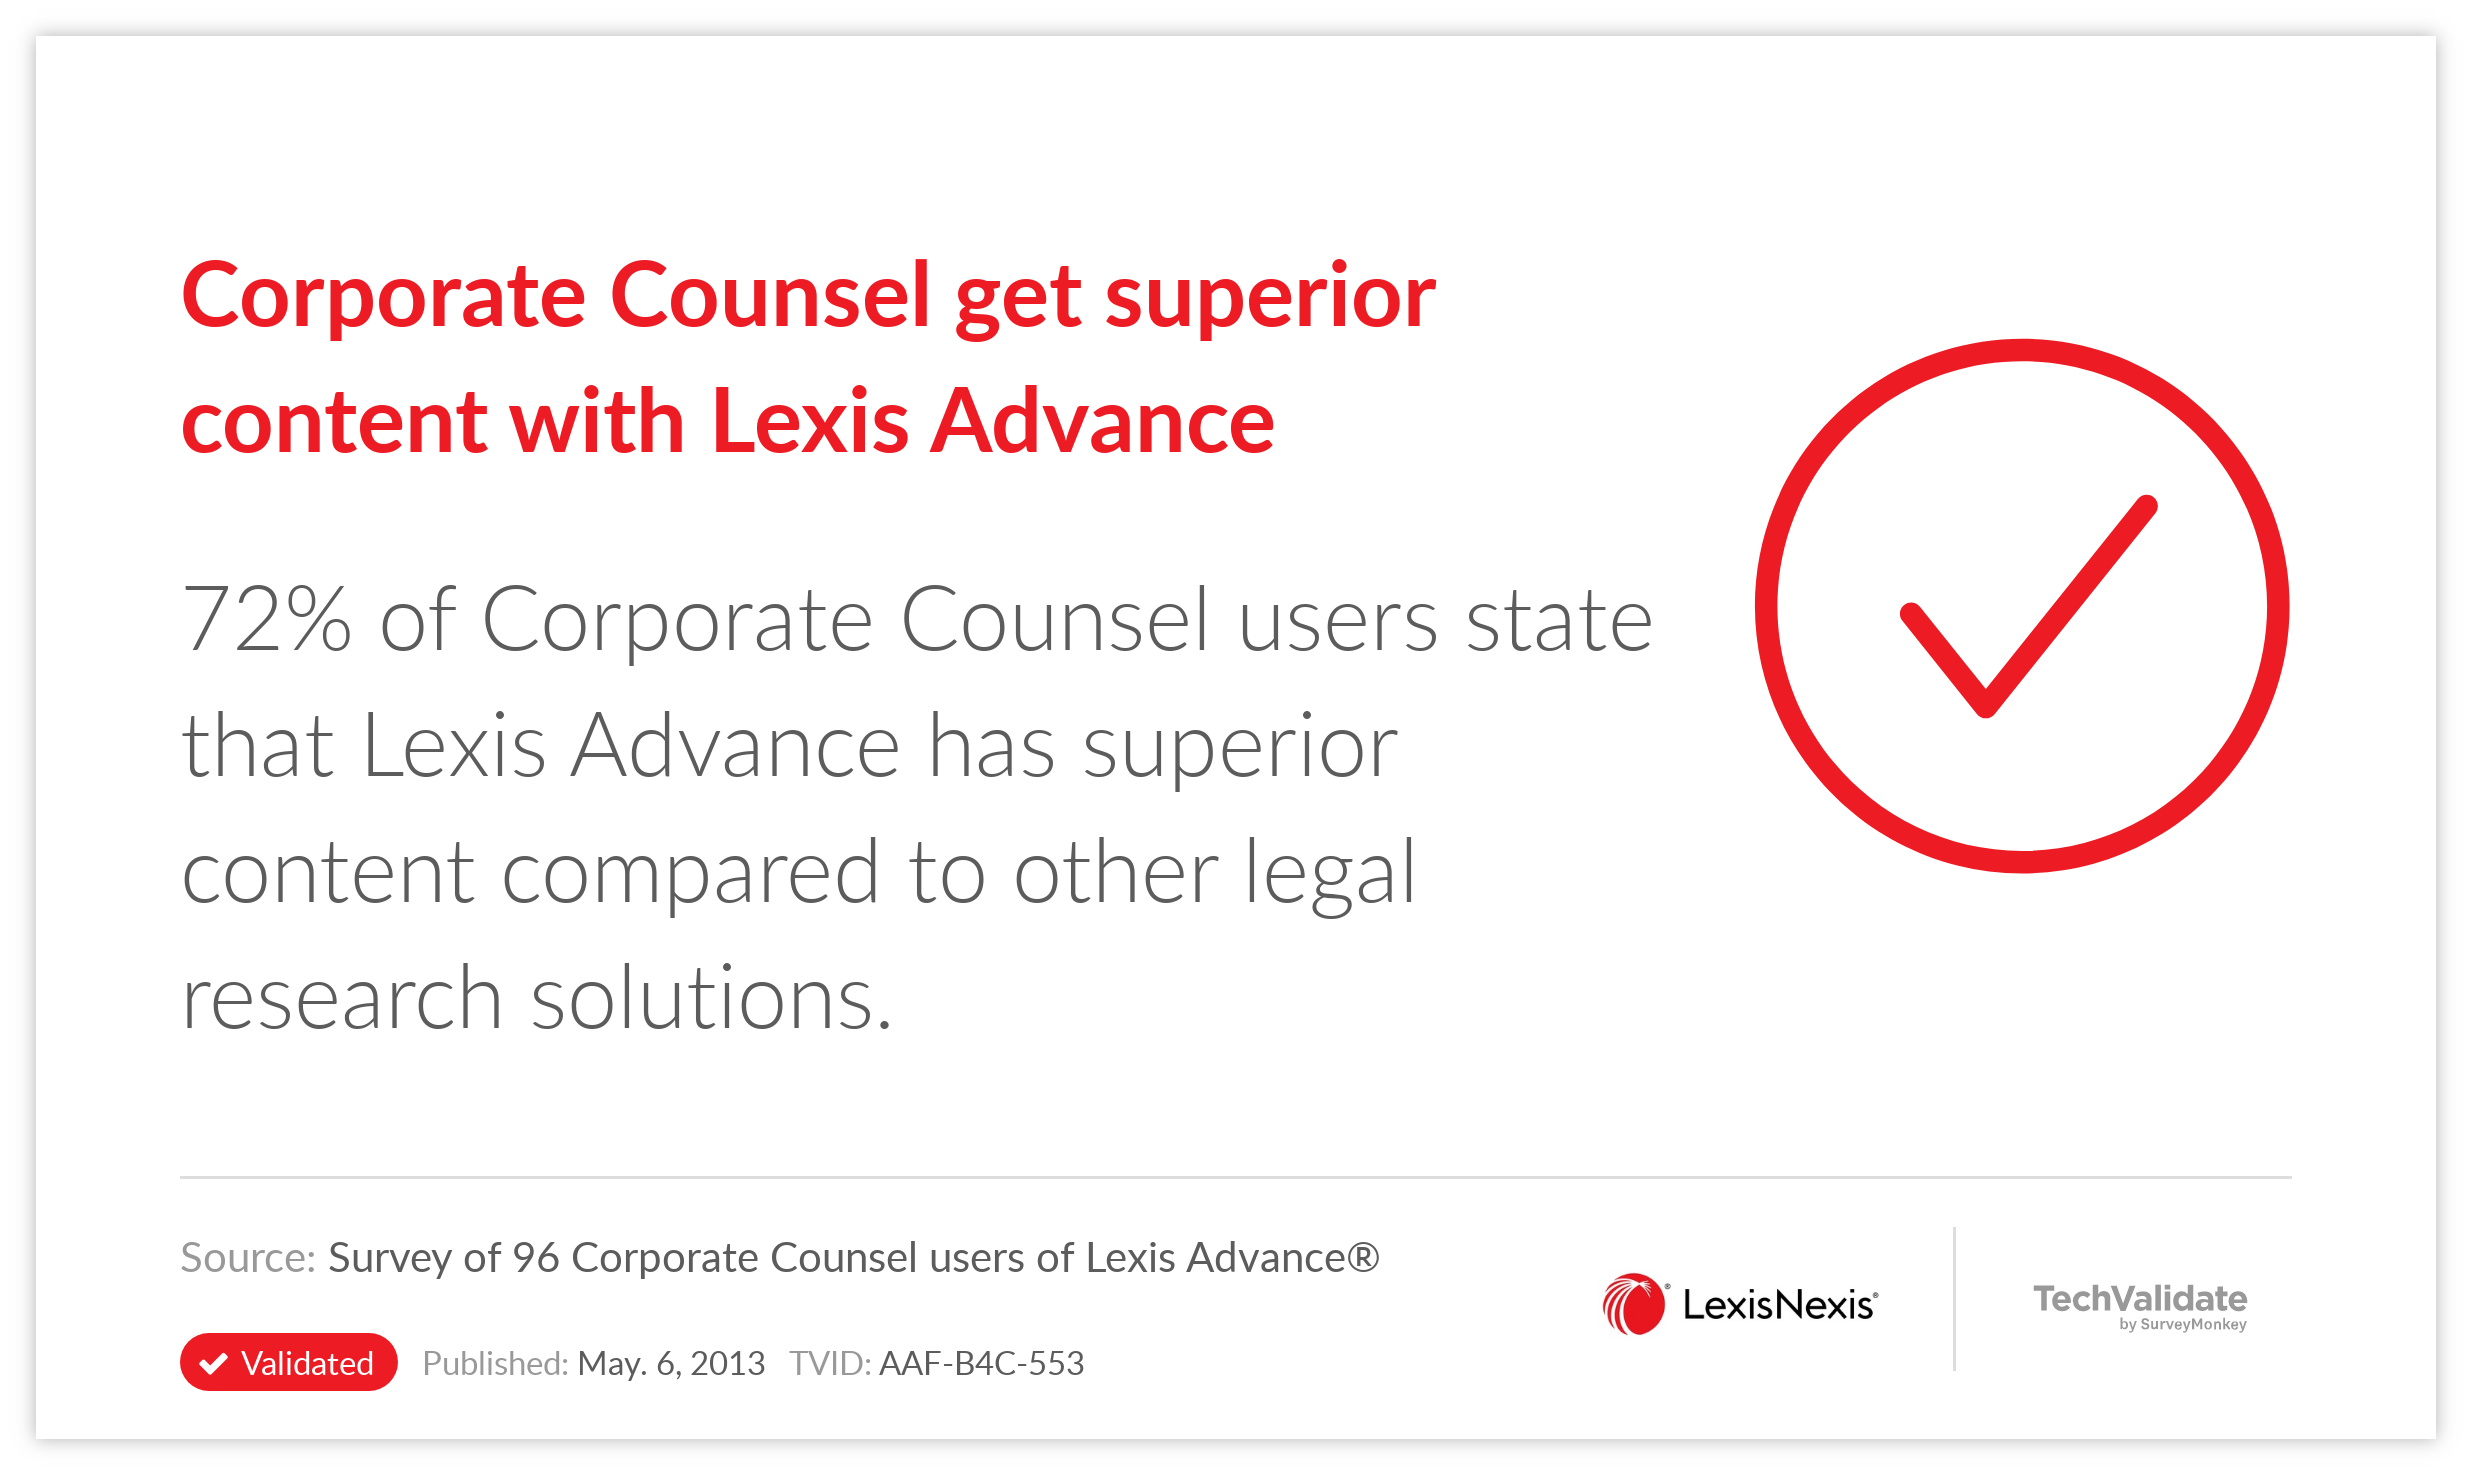 Corporate Counsel get superior content with Lexis Advance